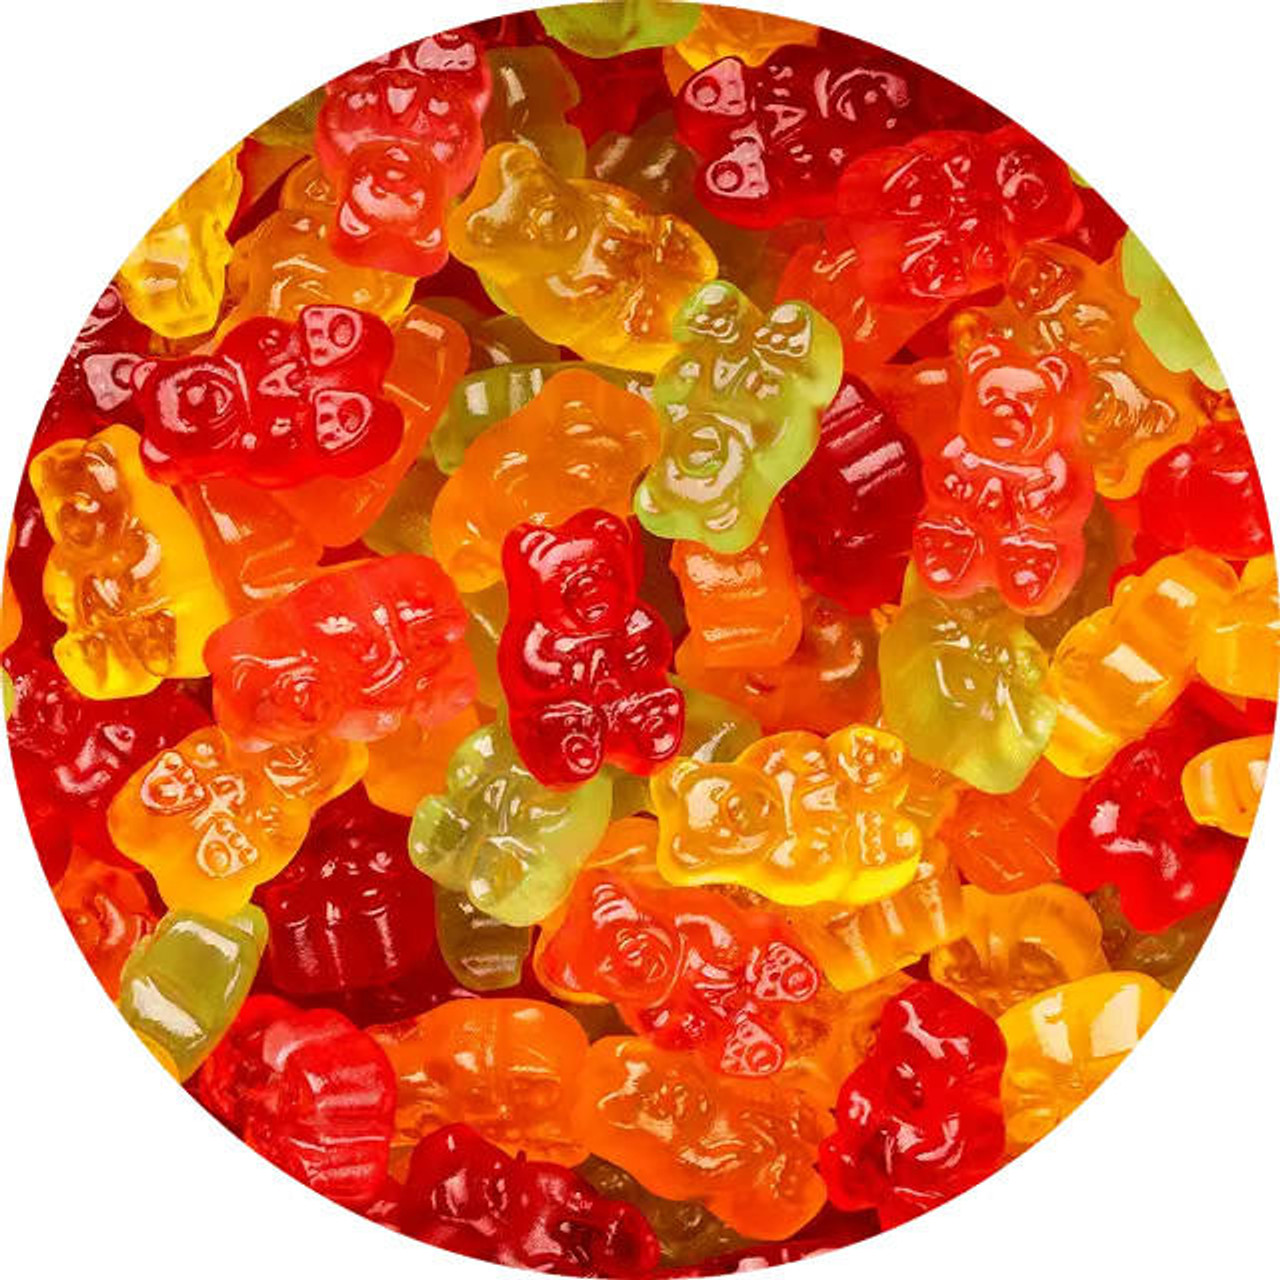  Albanese 5 Natural Flavor Gummi Bears 5 lb. - 4/Case | Brightly Colored Bears 